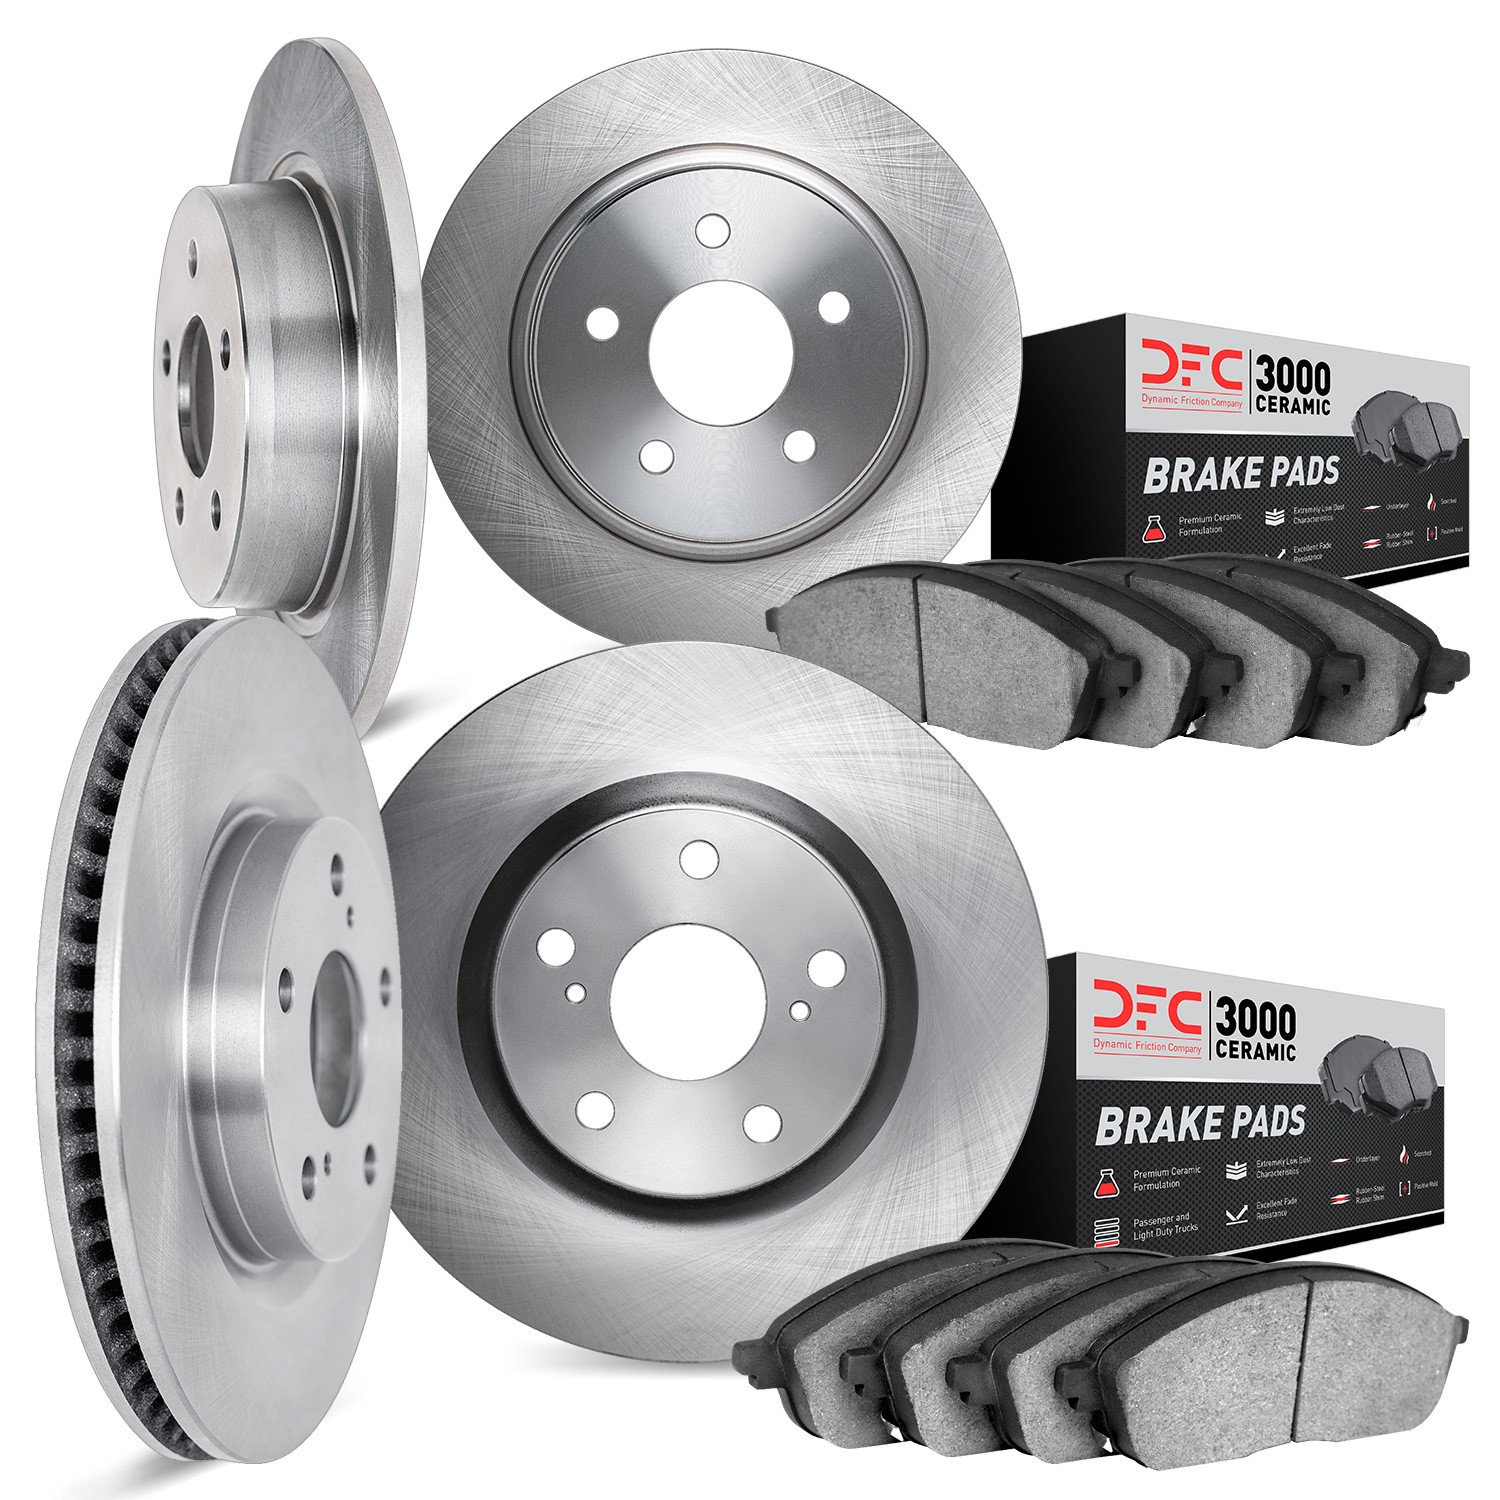 6304-42019 Brake Rotors with 3000-Series Ceramic Brake Pads Kit, Fits Select Mopar, Position: Front and Rear